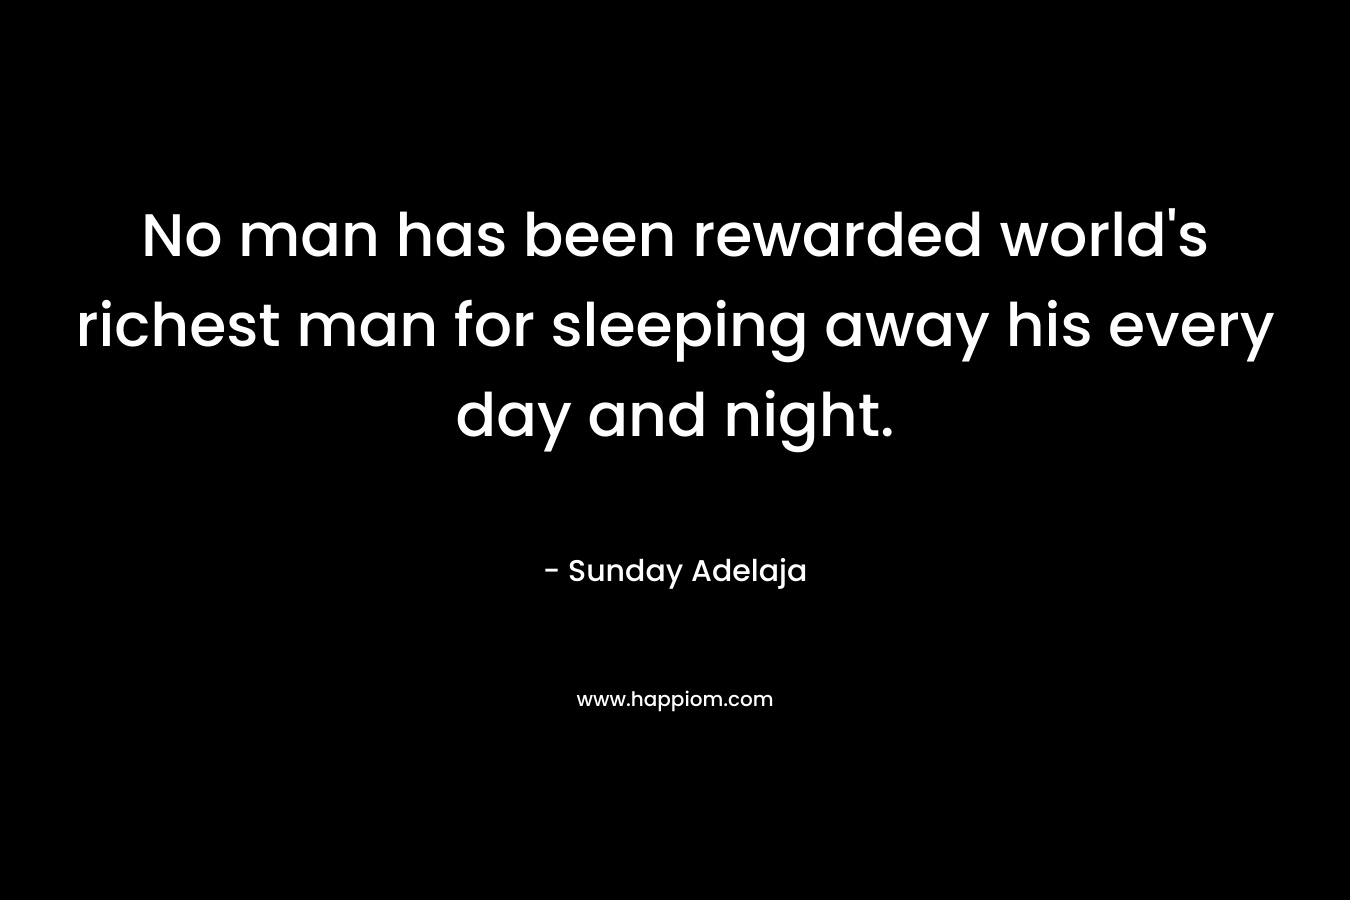 No man has been rewarded world's richest man for sleeping away his every day and night.